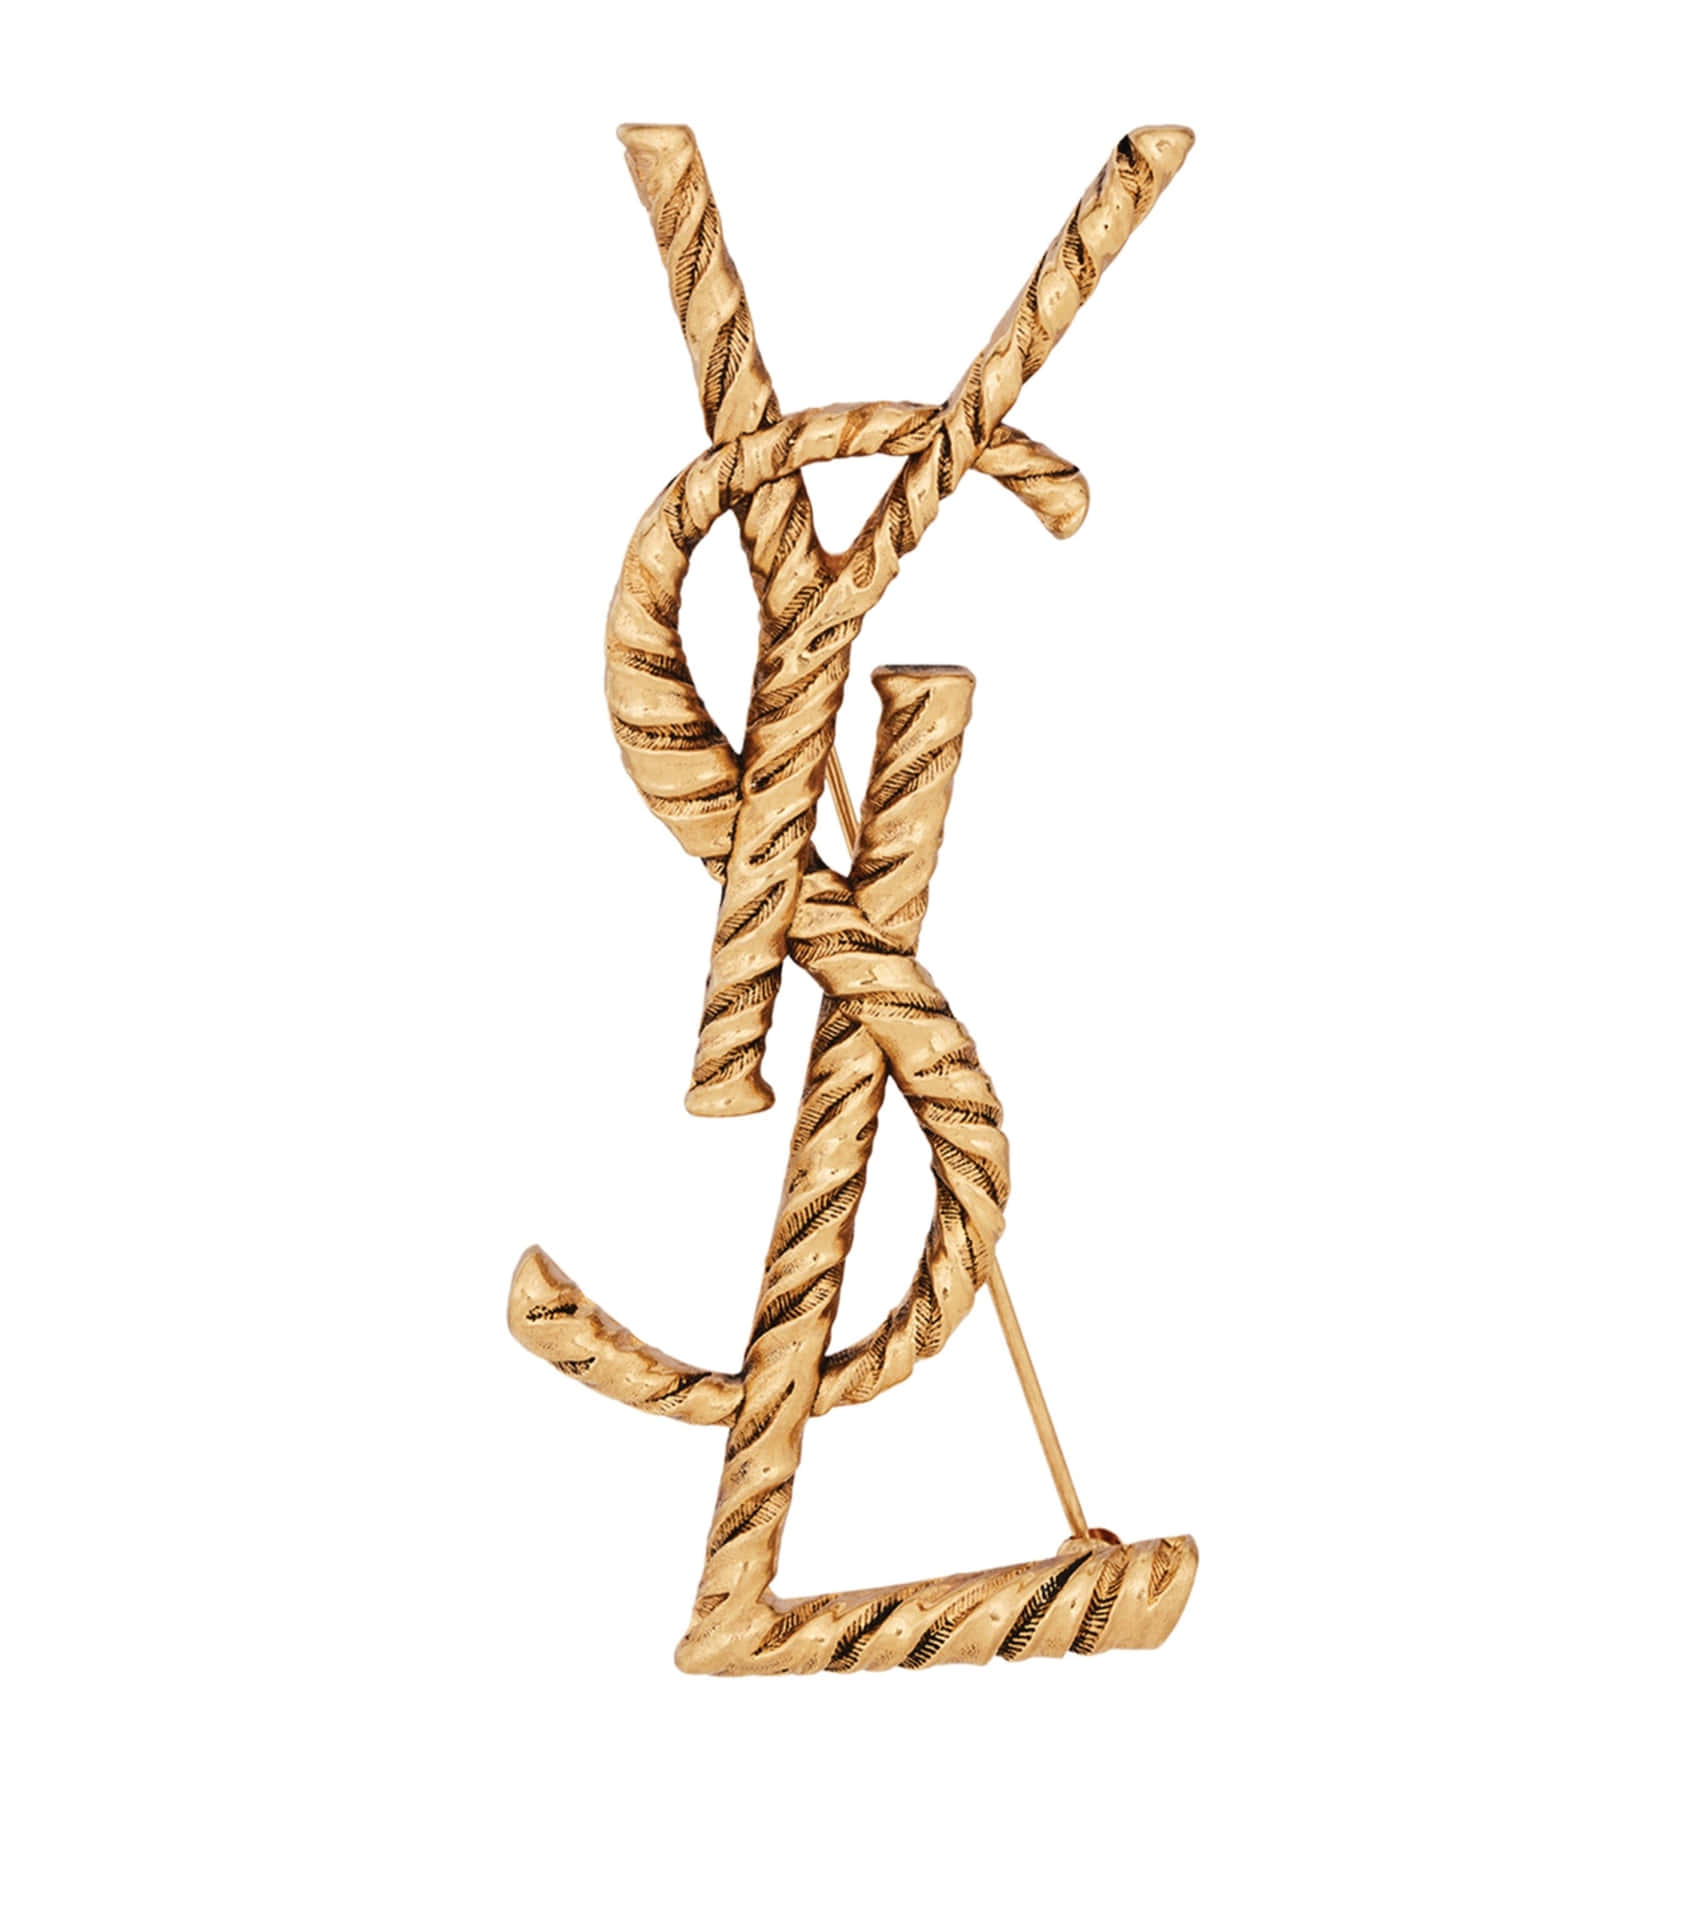 Upgrade your wardrobe with YSL's fresh style